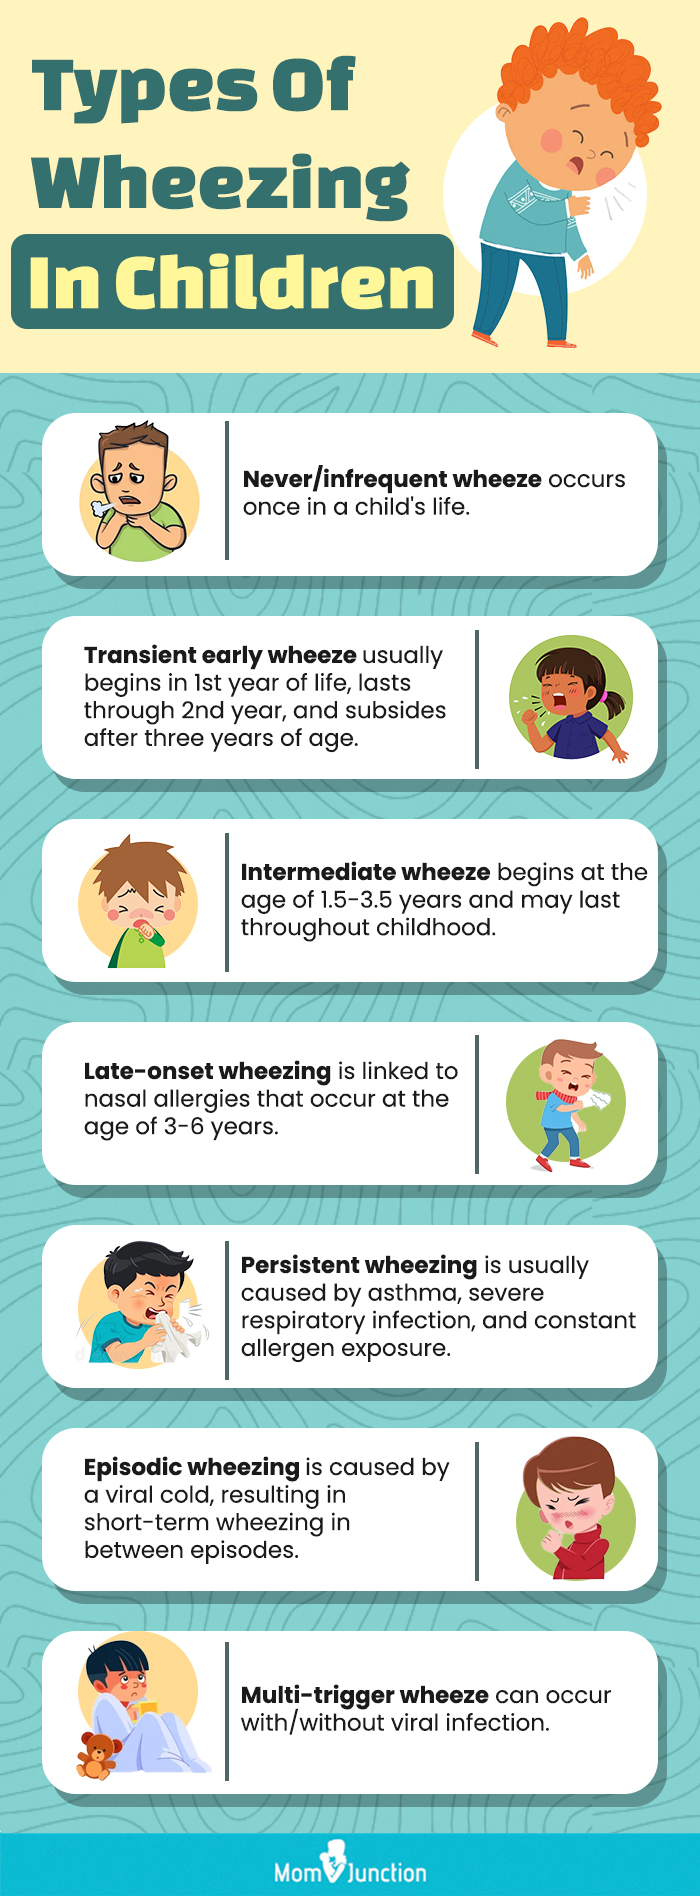 types of wheezing in children (infographic)